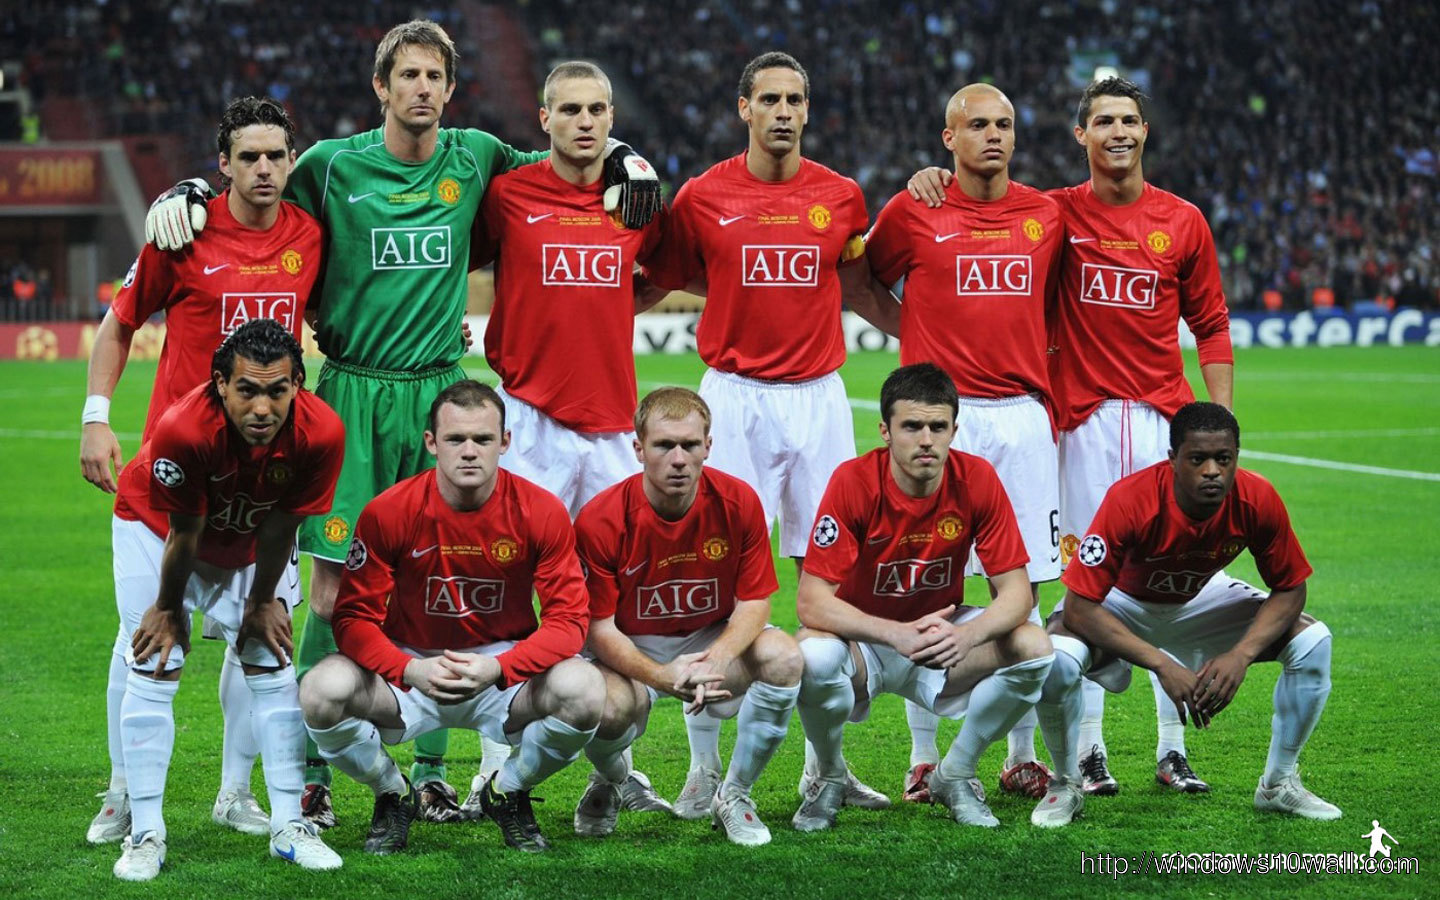 Manchester United FC wallpaper free download for mobiles